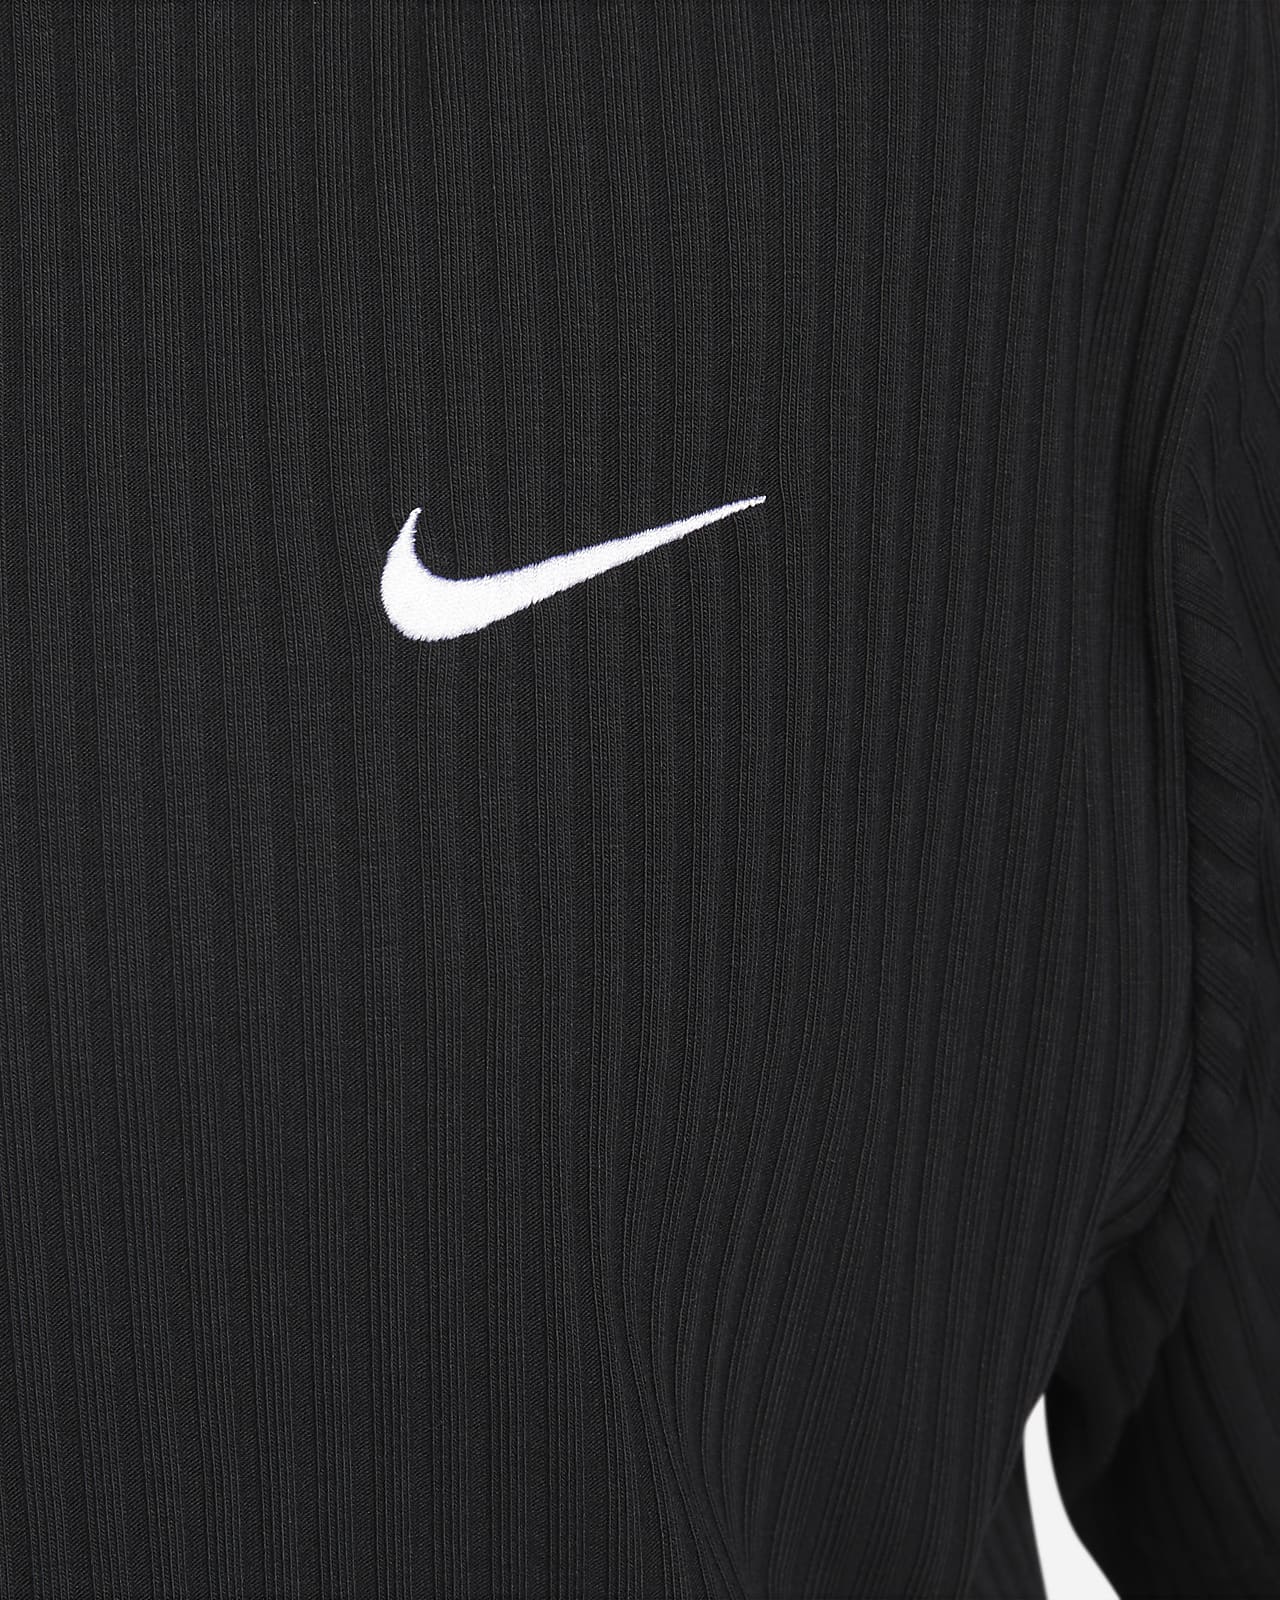 Nike ribbed jersey top in gray